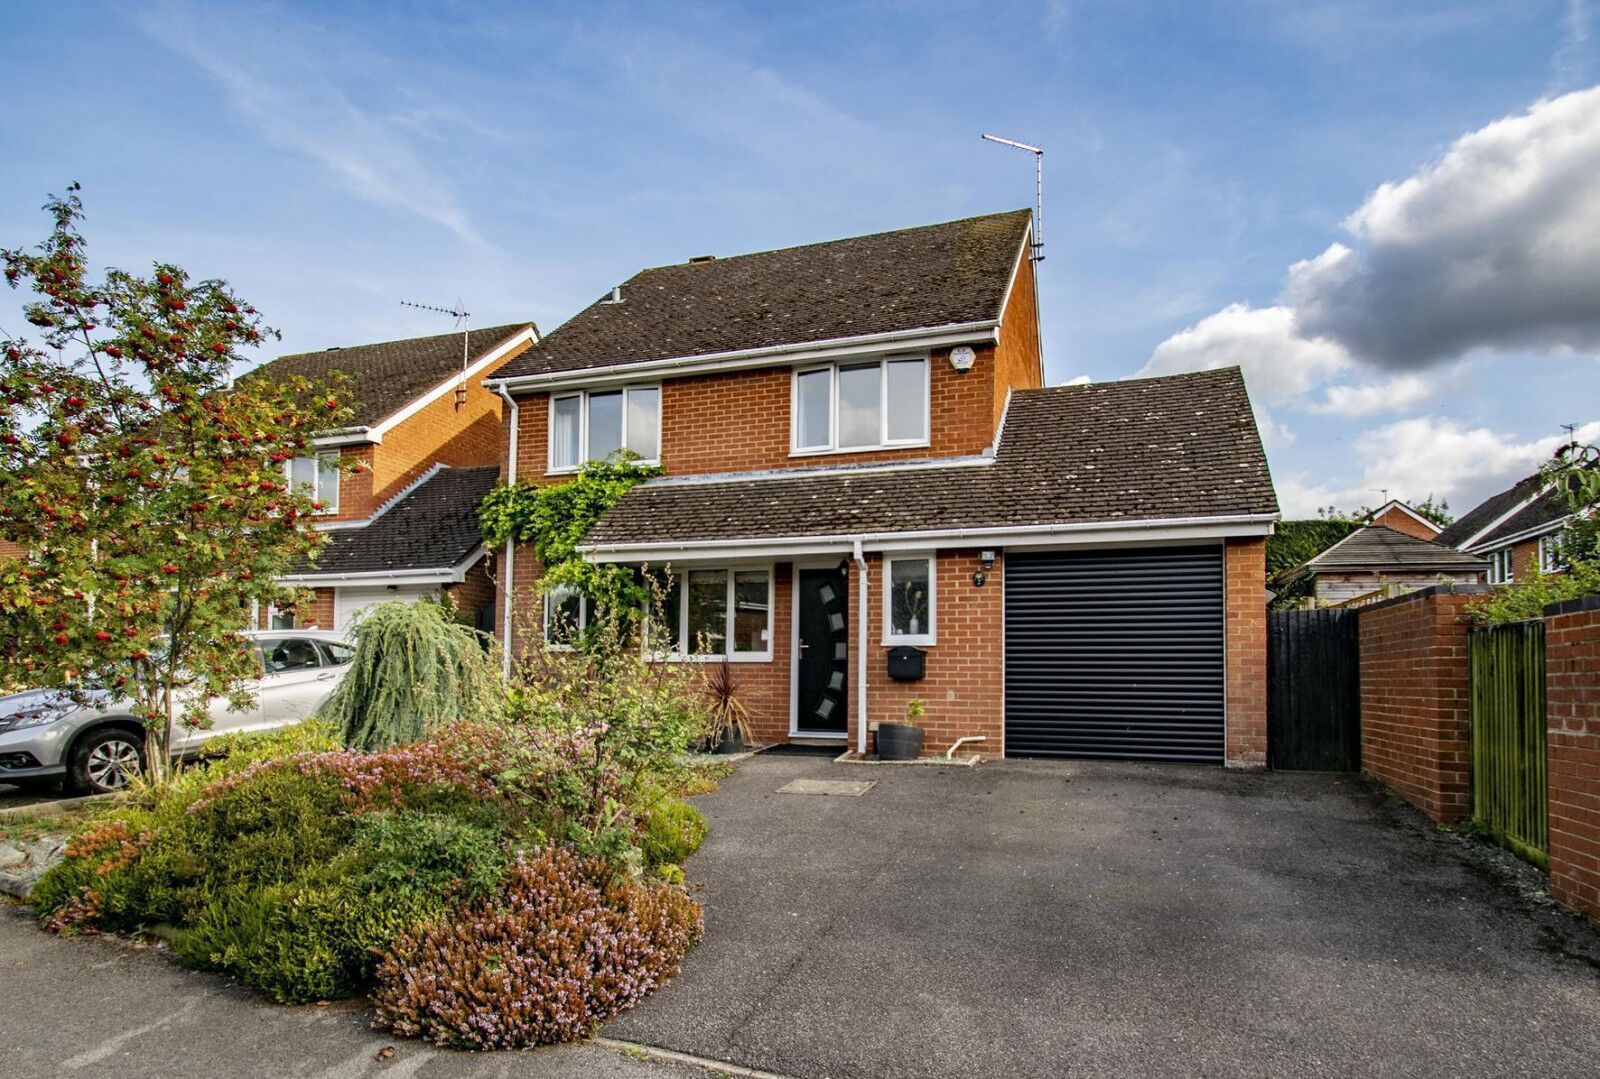 4 bedroom detached house for sale Lackmore Gardens, Woodcote, RG8, main image